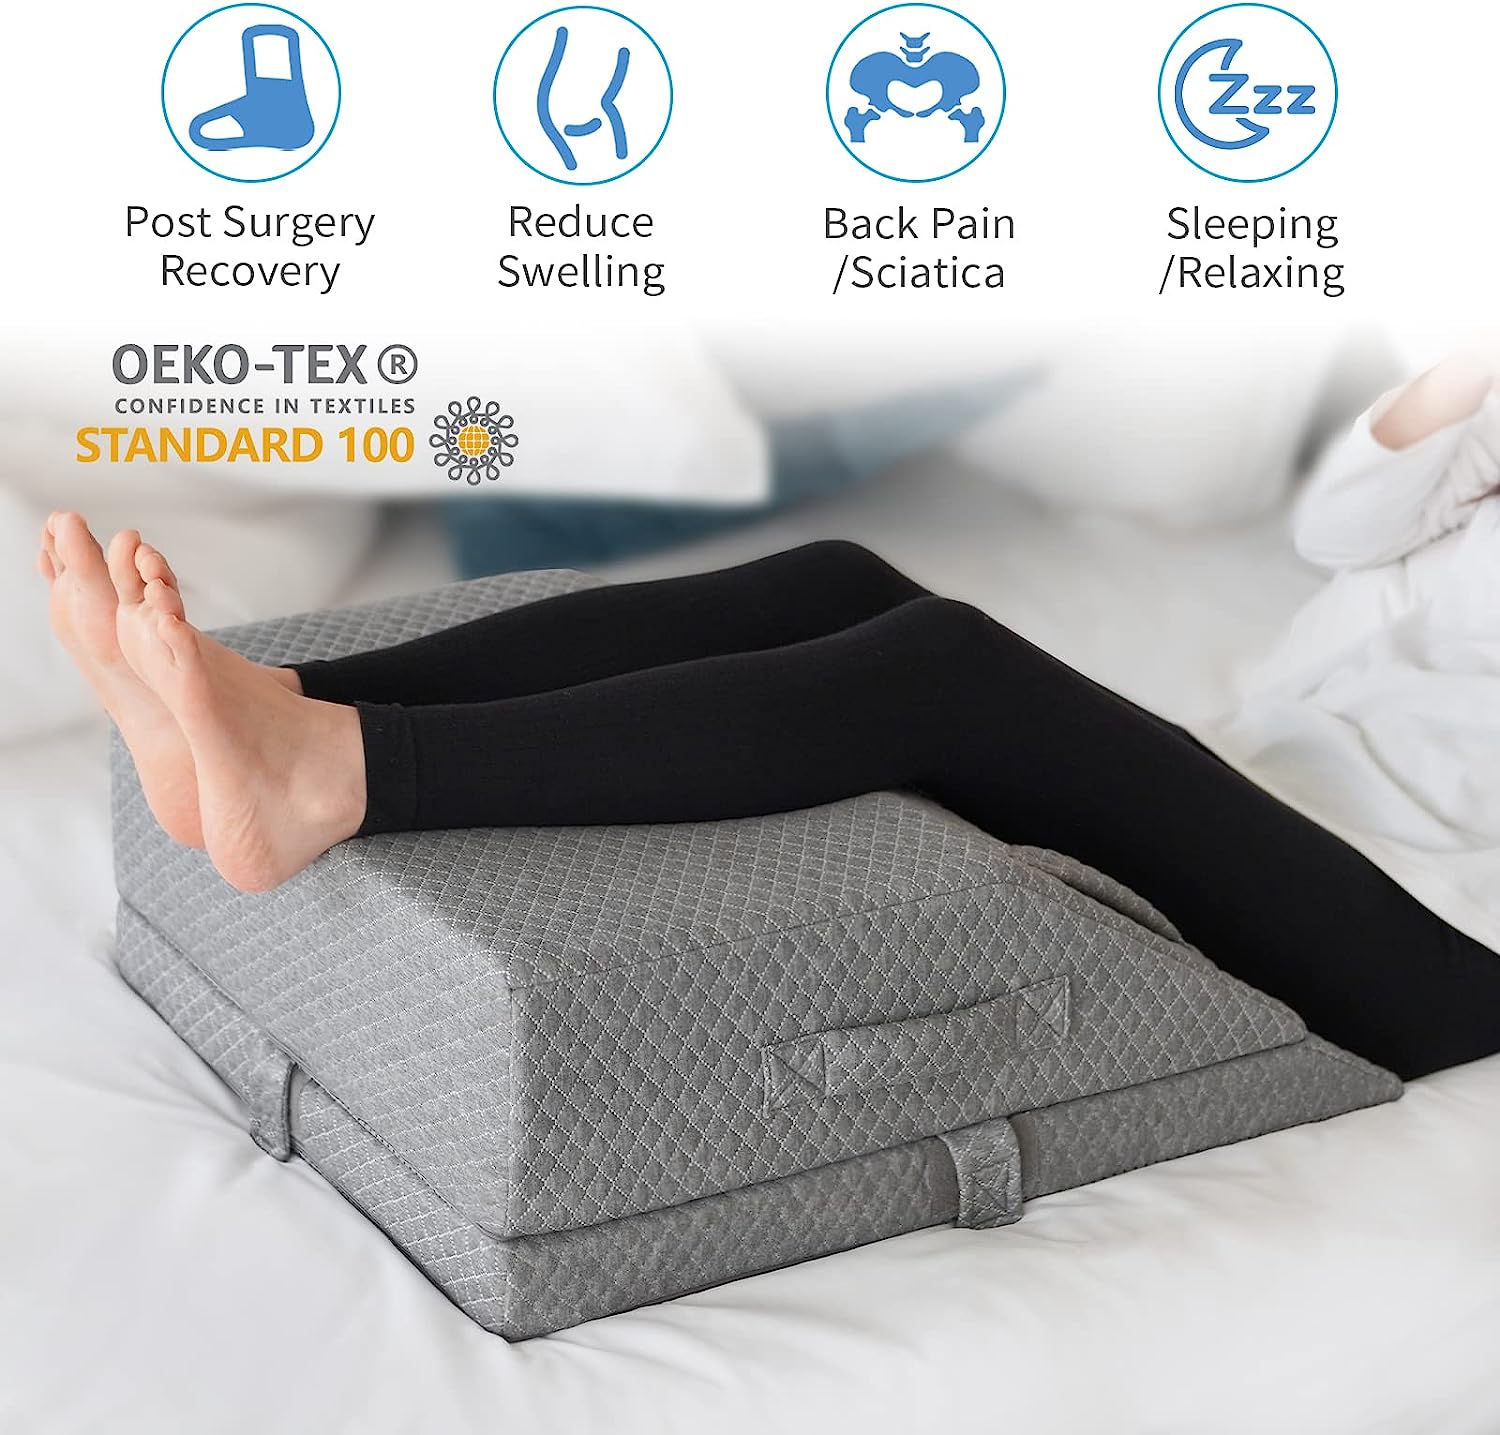 Leg Elevation Pillow for Swelling after Surgery 8 Leg Pillow for Sleeping  Memor